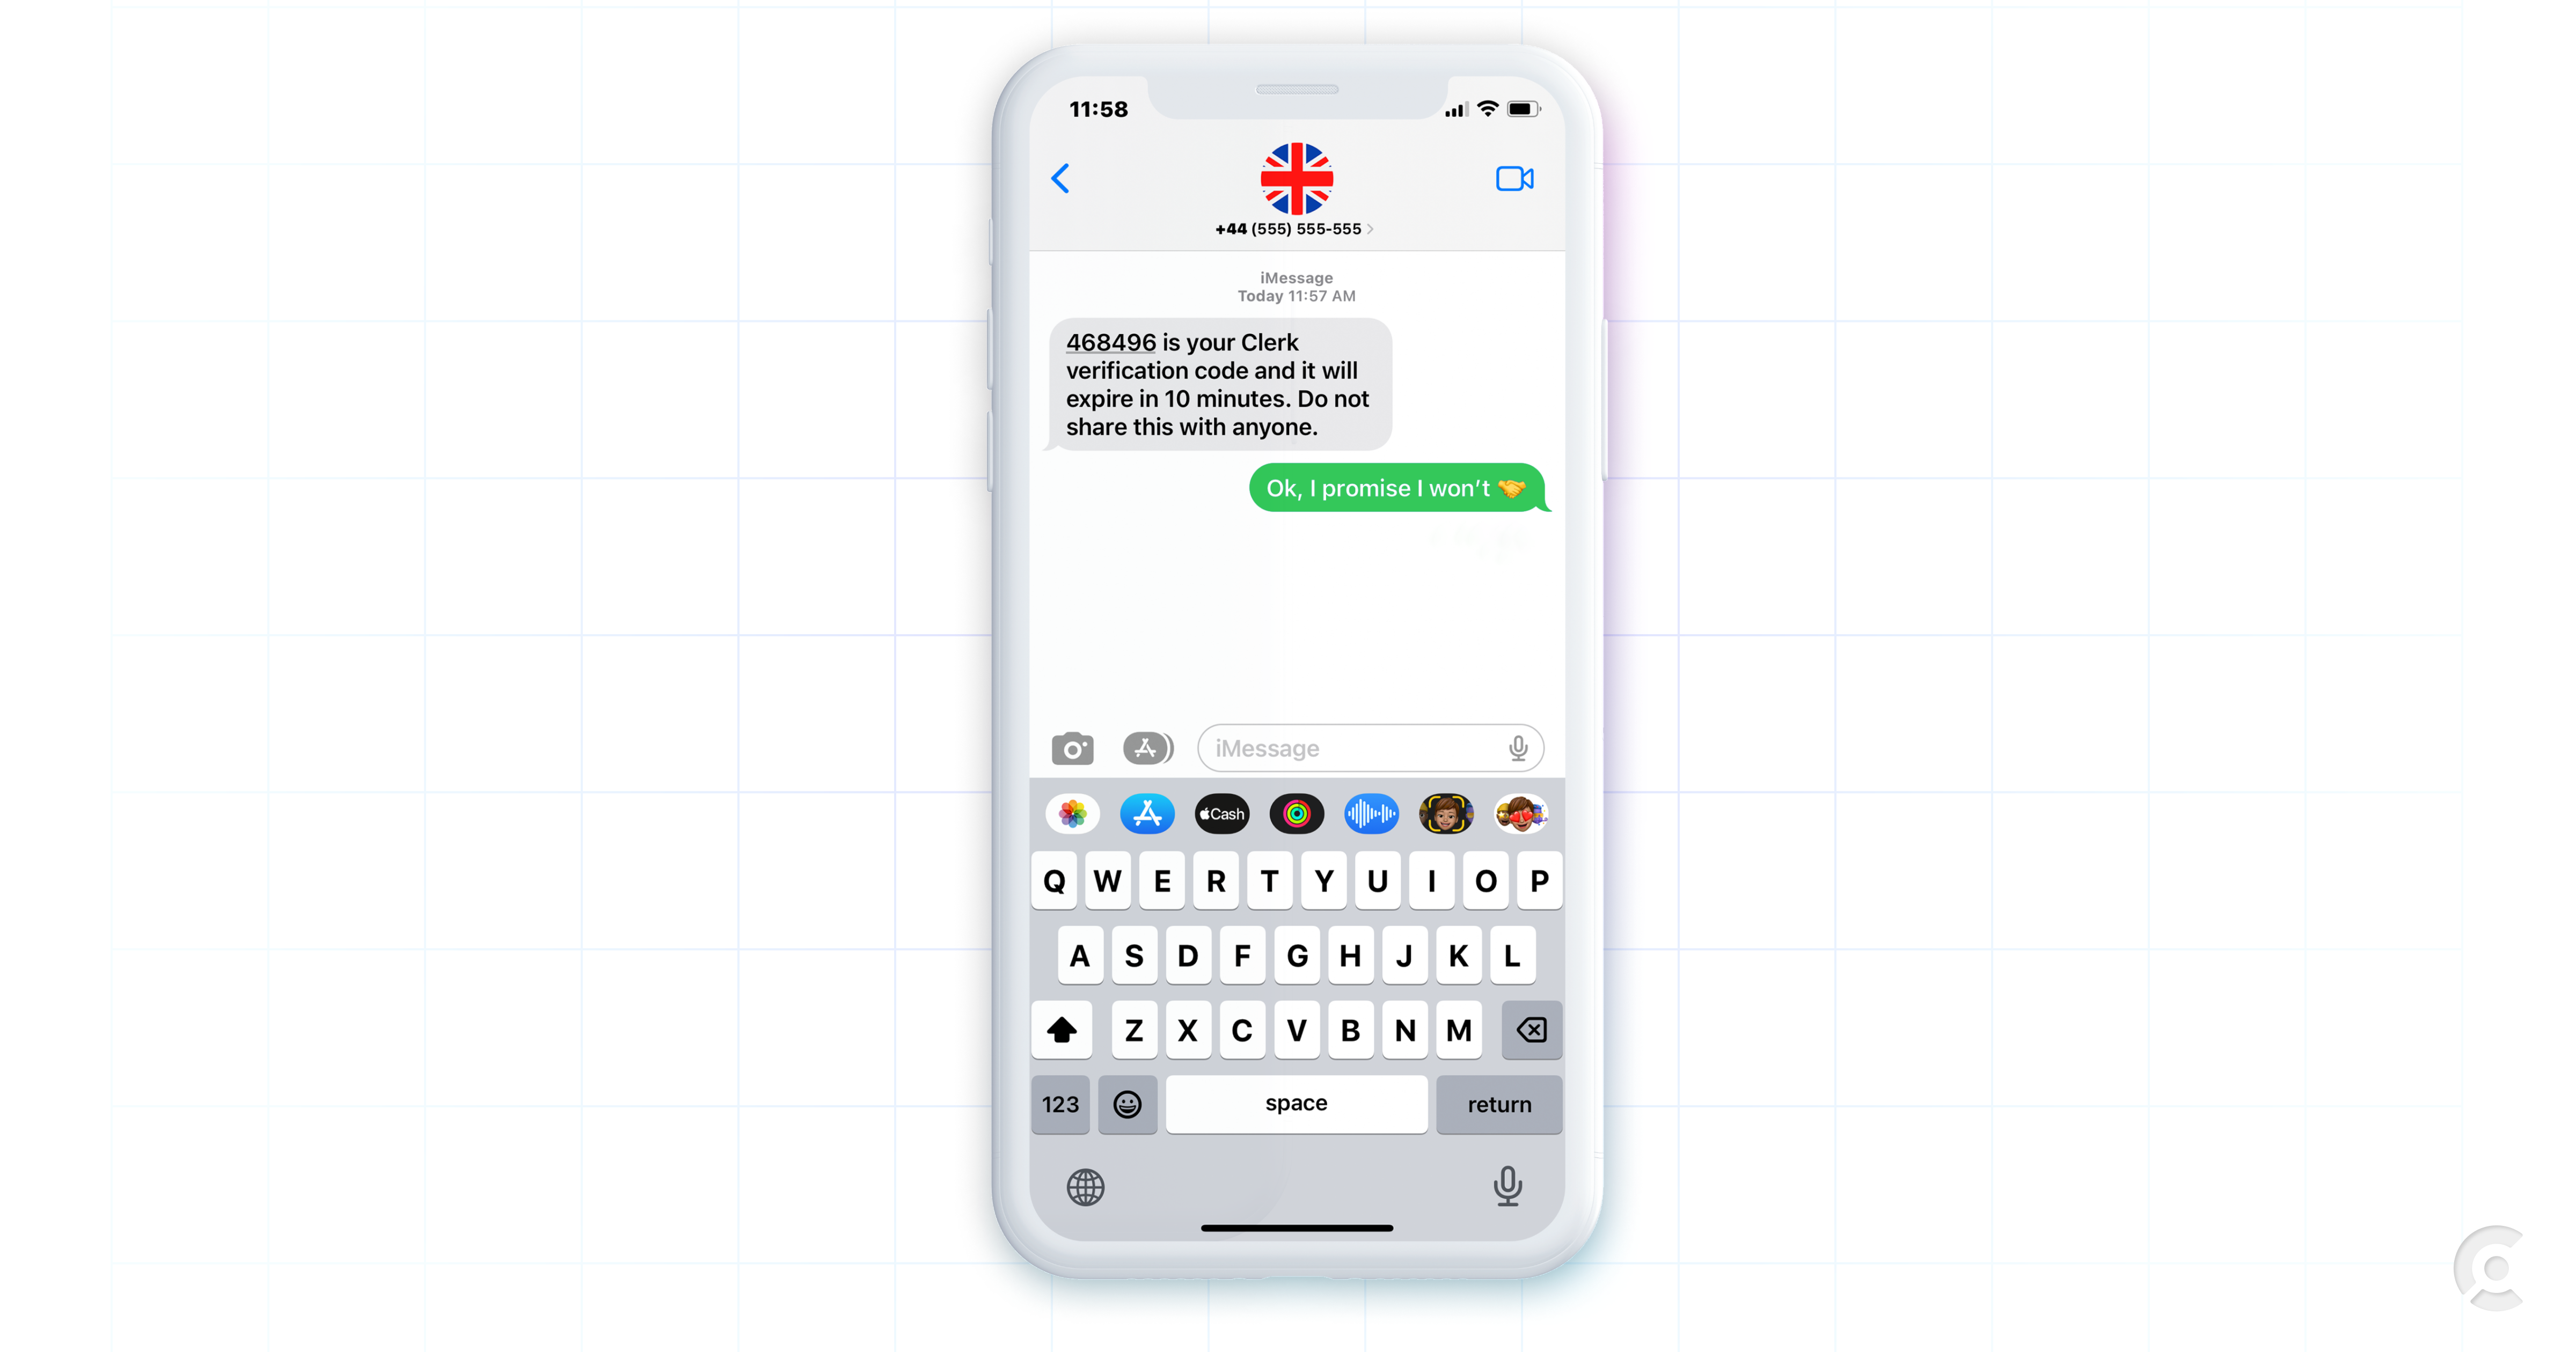 SMS OTP Now Uses UK Numbers for UK Users